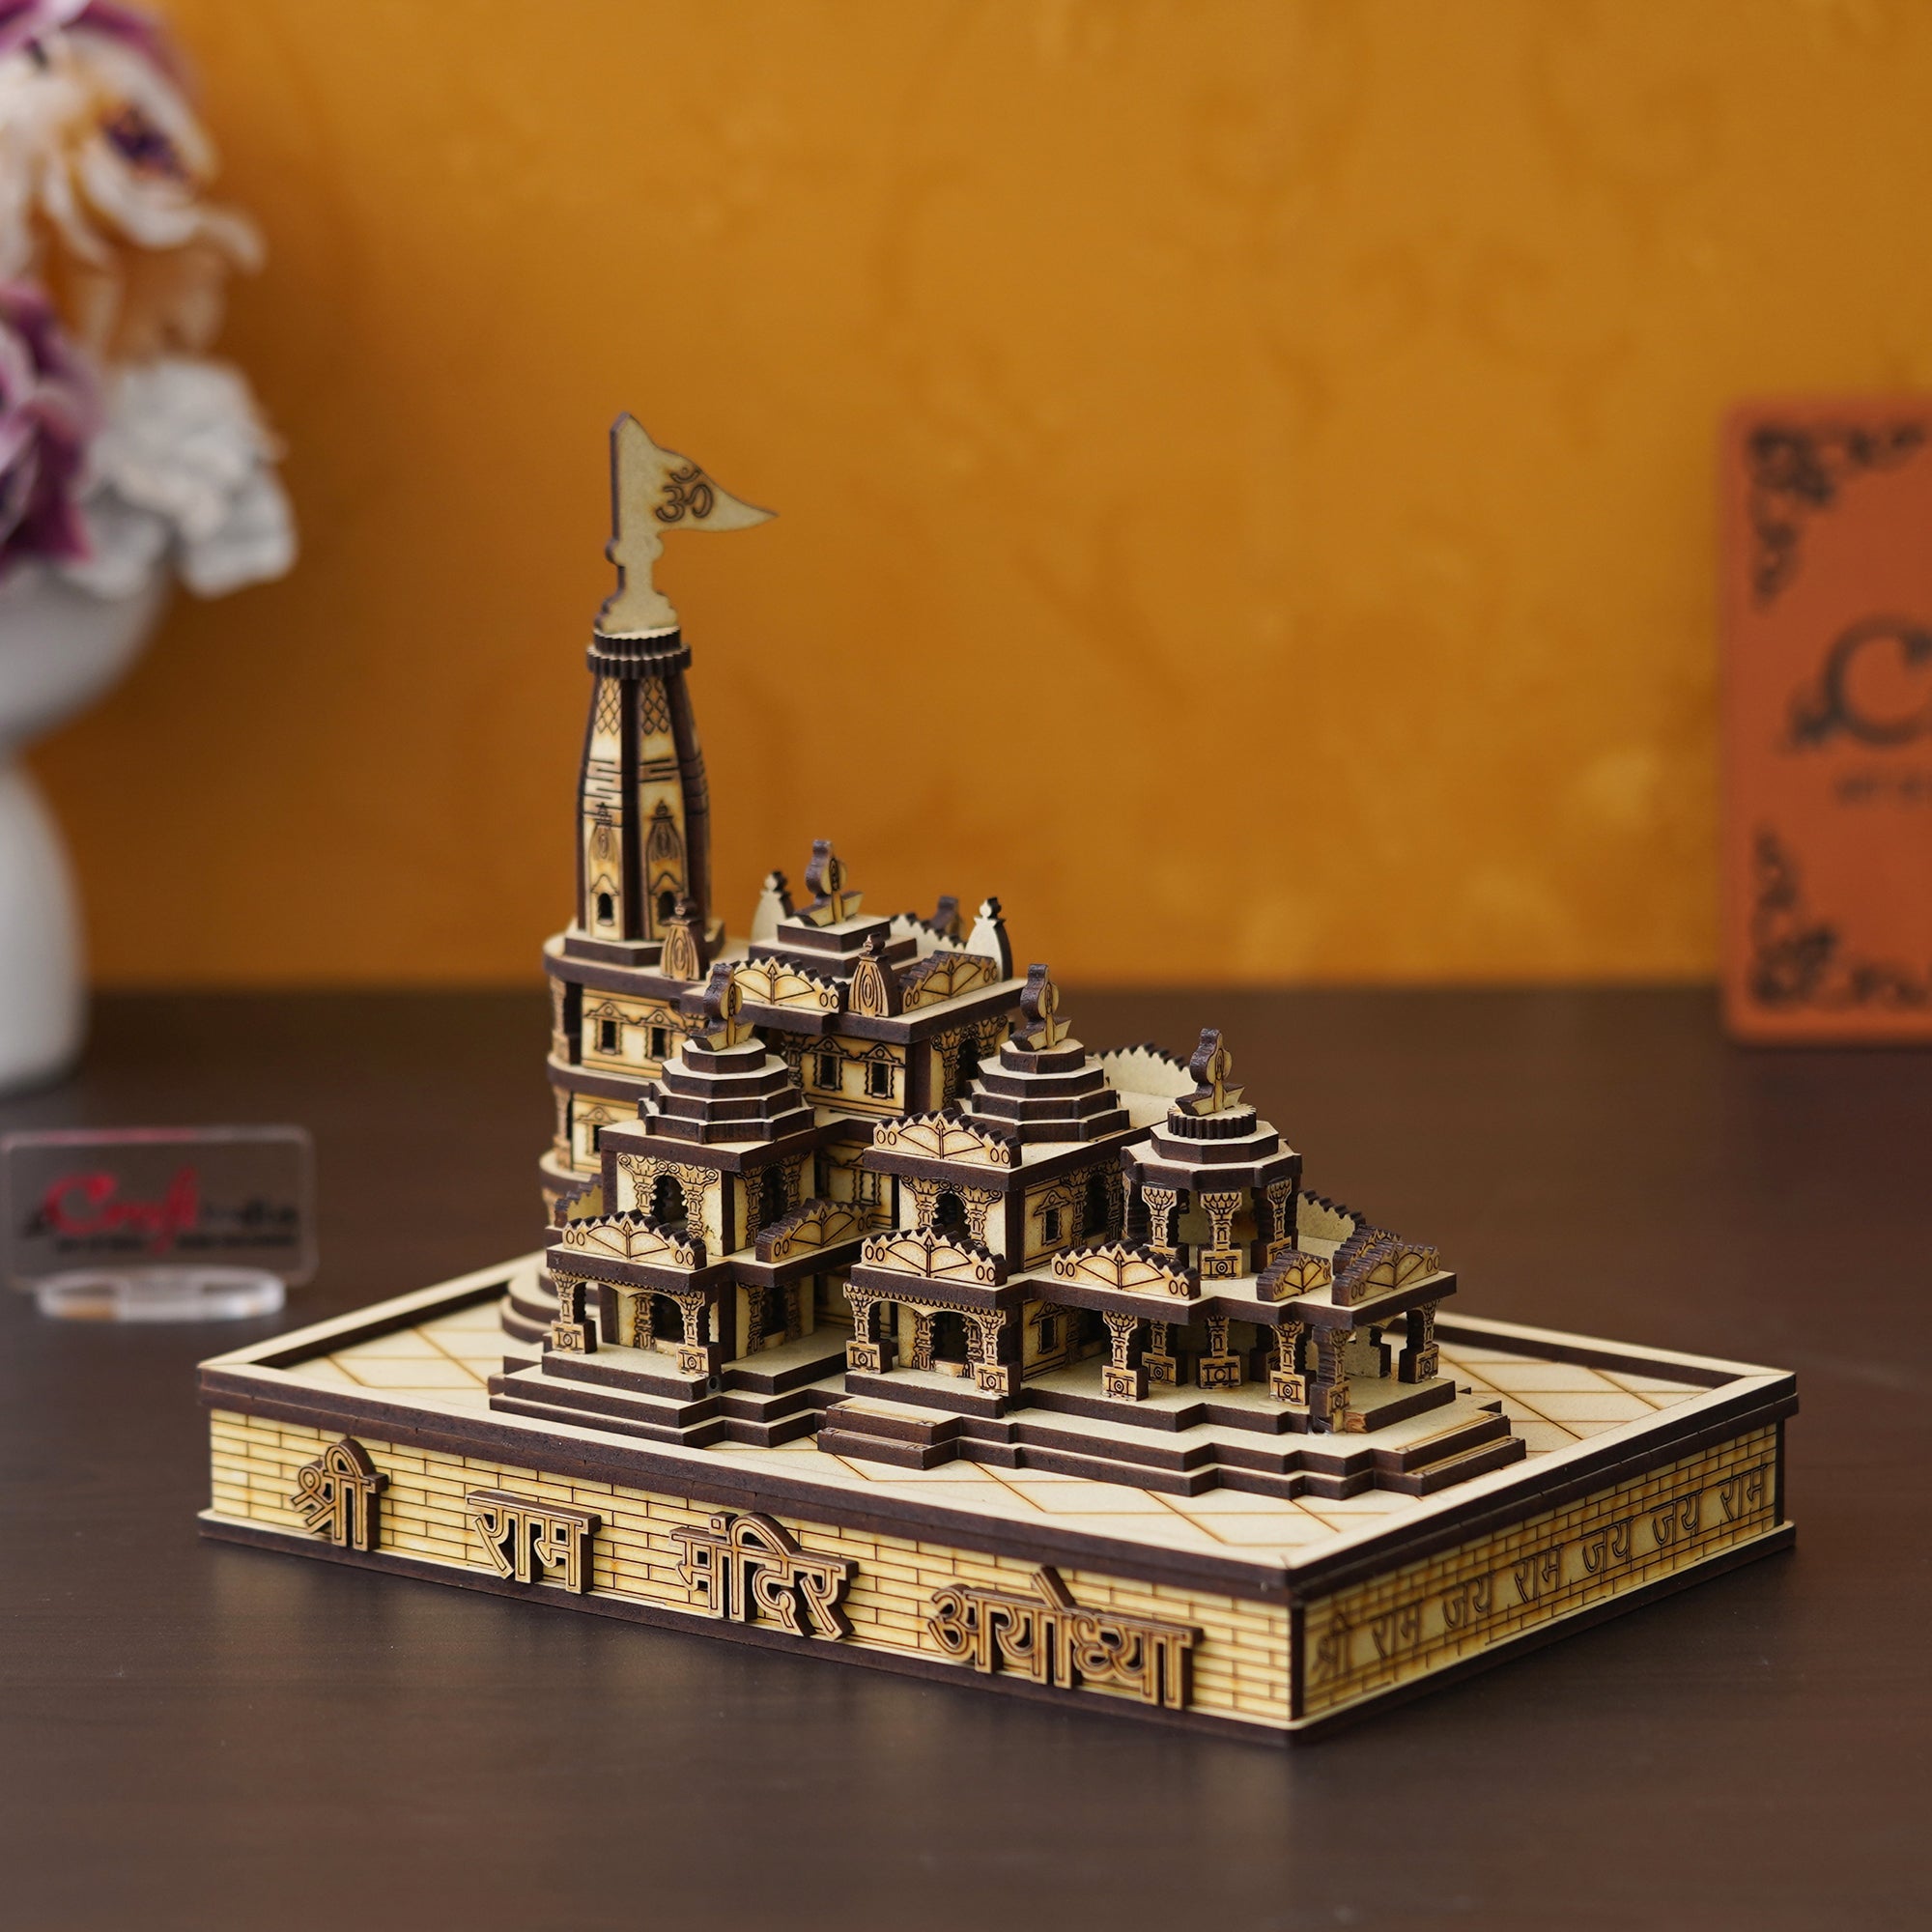 eCraftIndia Shri Ram Mandir Ayodhya Model with Light and Power Adapter - Wooden MDF Craftsmanship Authentic Designer Temple with Protective Gift Box - Ideal for Home Temple, Decor, and Spiritual Gifting